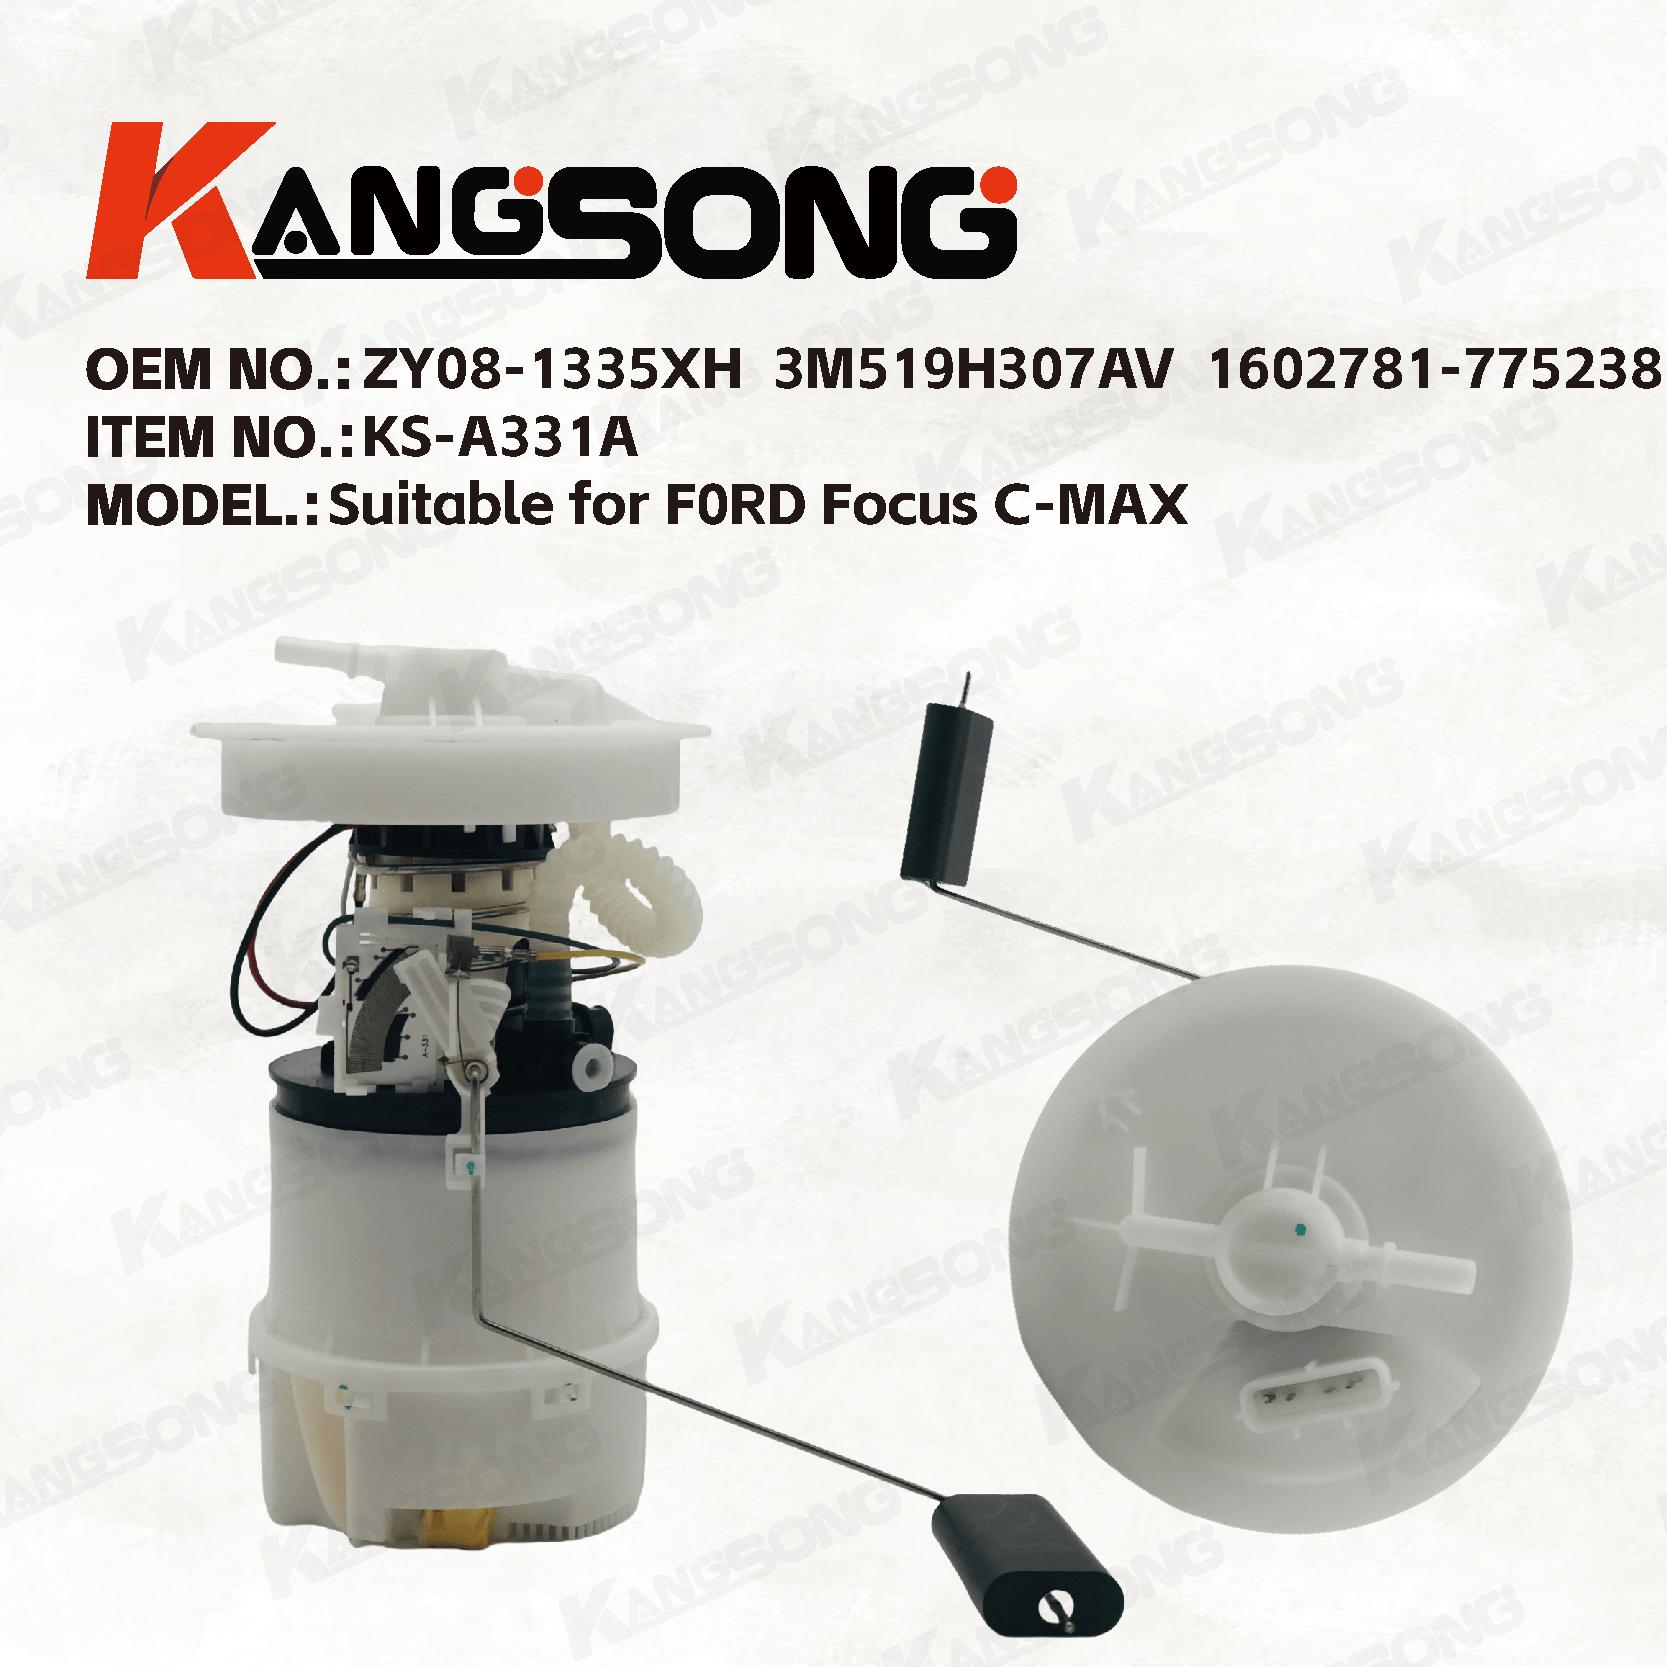 Applicable to F0RD Focus C-MAX/ZY08-1335XH 3M519H307AV 1529595/Fuel pump assembly/KS-A331A